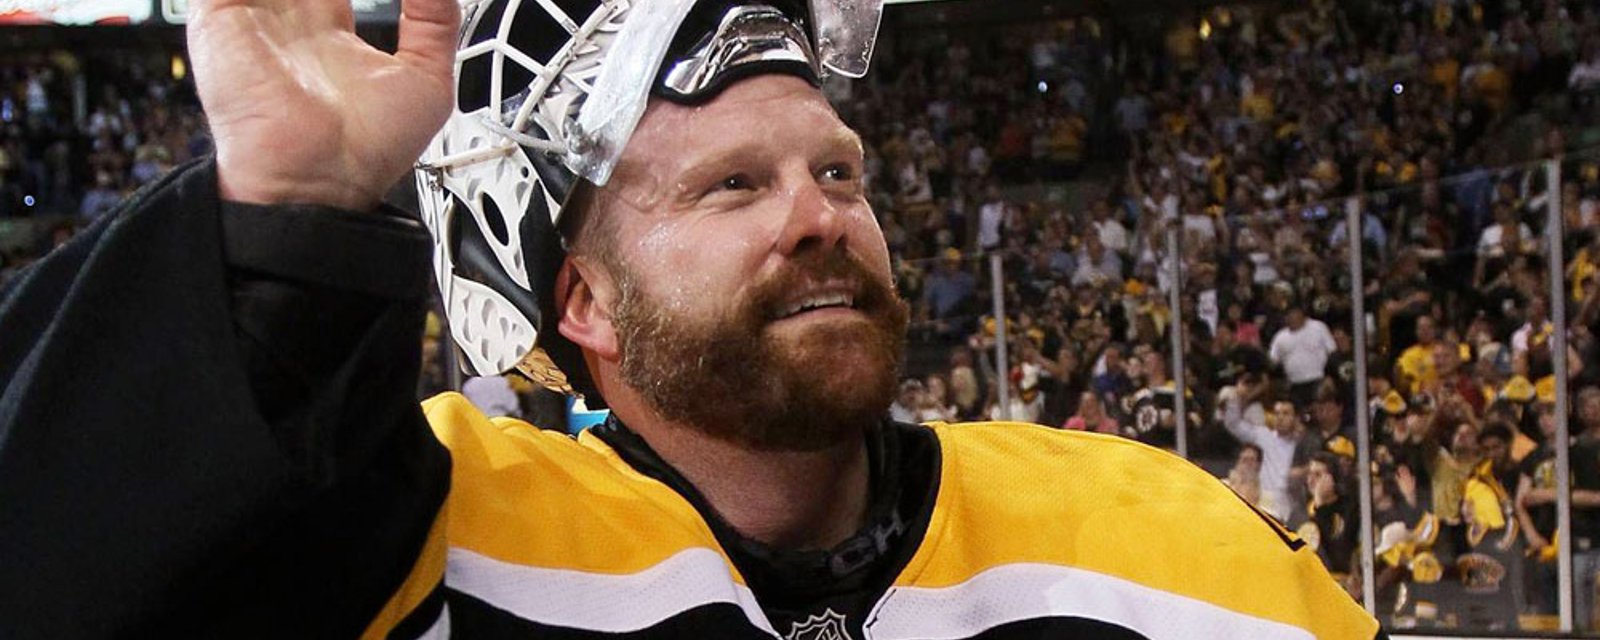 Tim Thomas details the brain damage and injuries that forced him into retirement